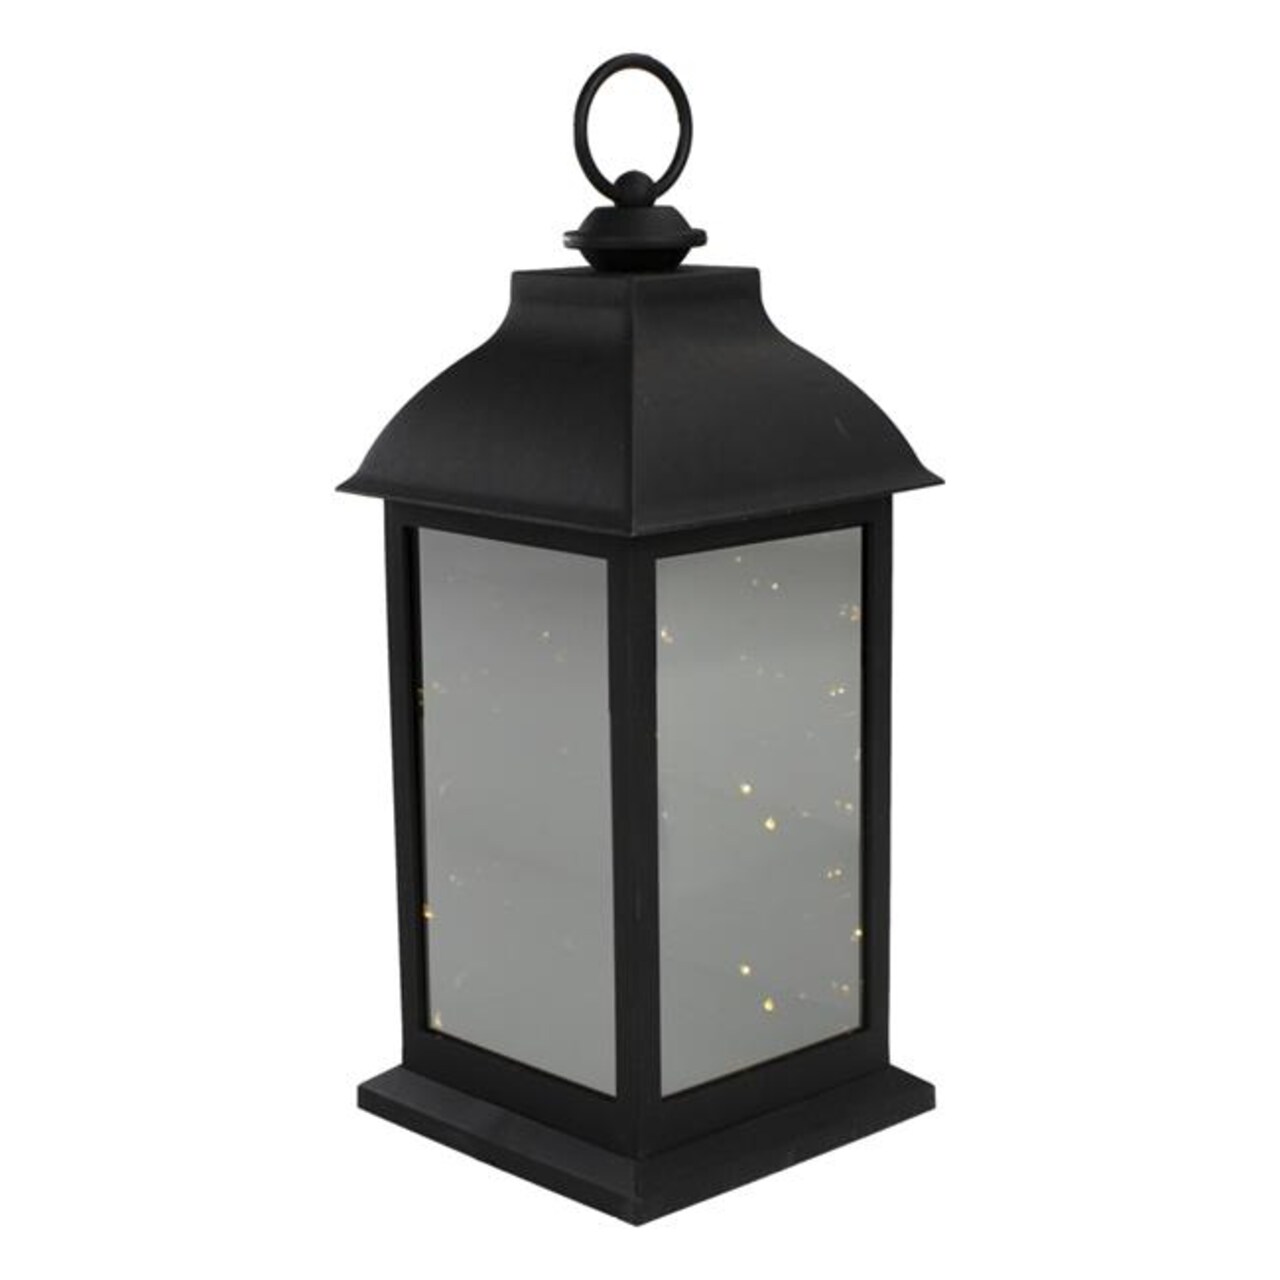 NorthLight 34380908 12.4 in. LED Lighted Battery Operated Lantern Warm White Flickering Light